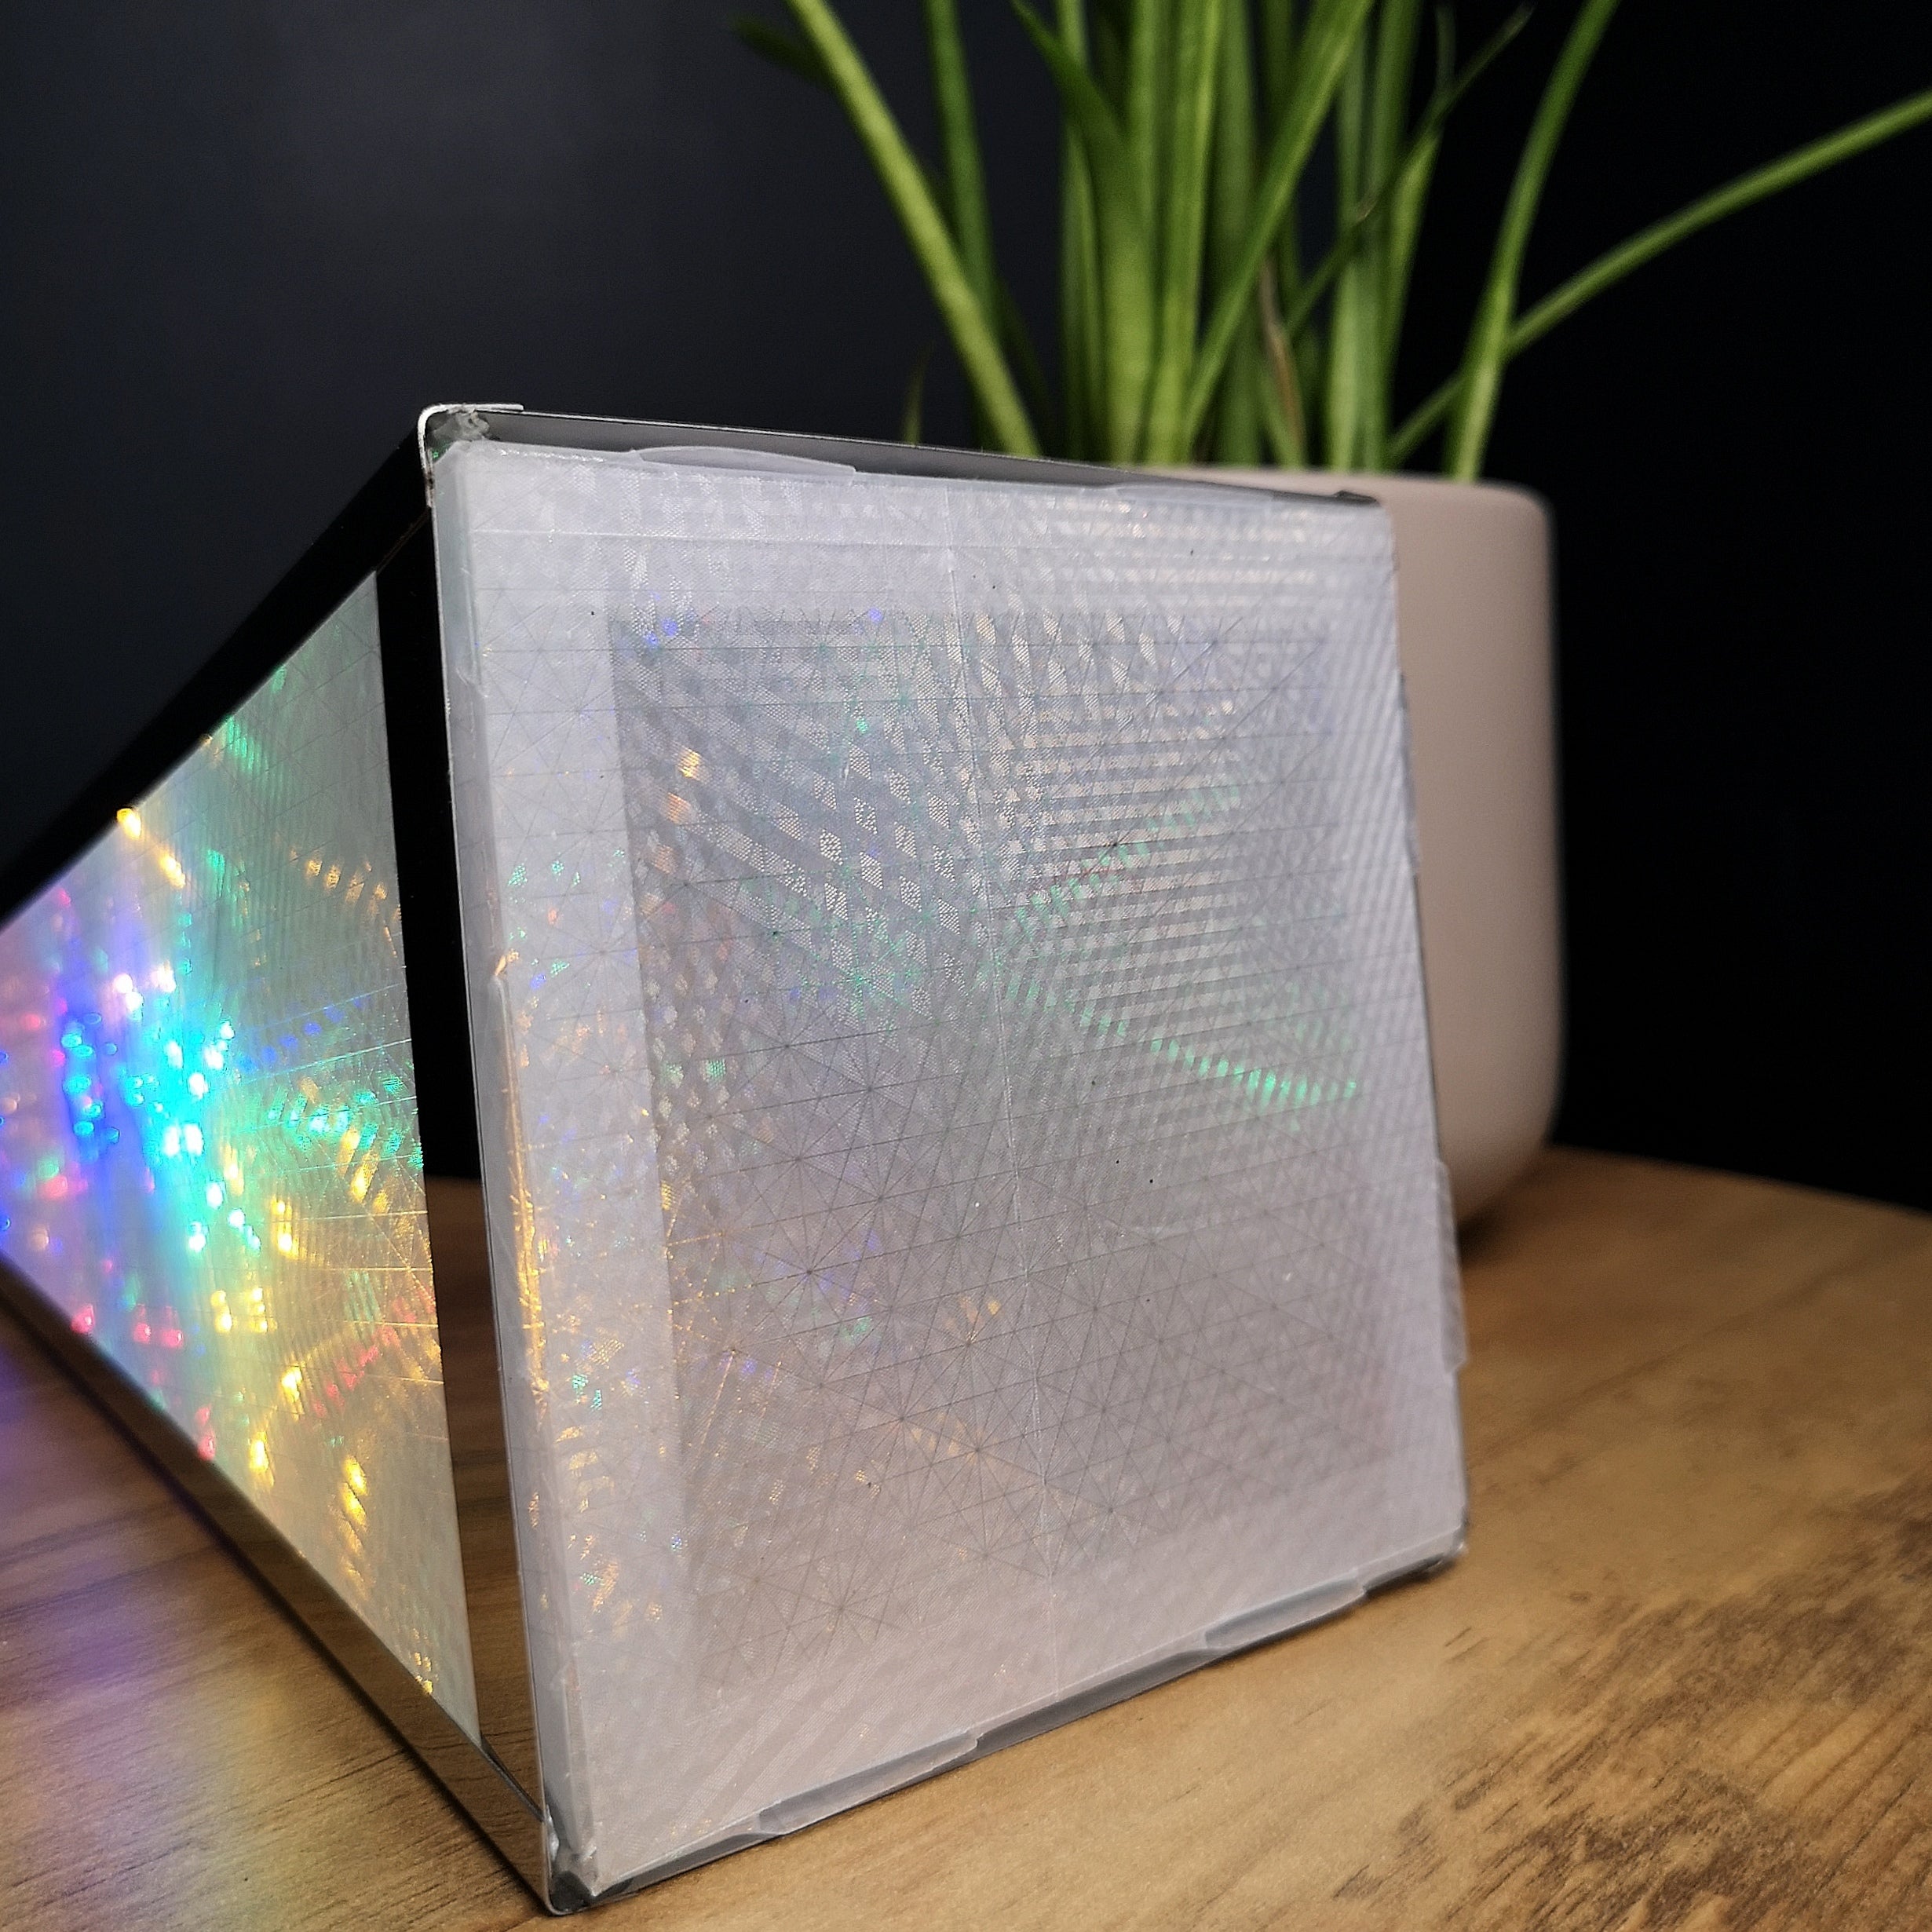 Premier Christmas 45cm Holographic Pyramid with Multi Colour LED Lights